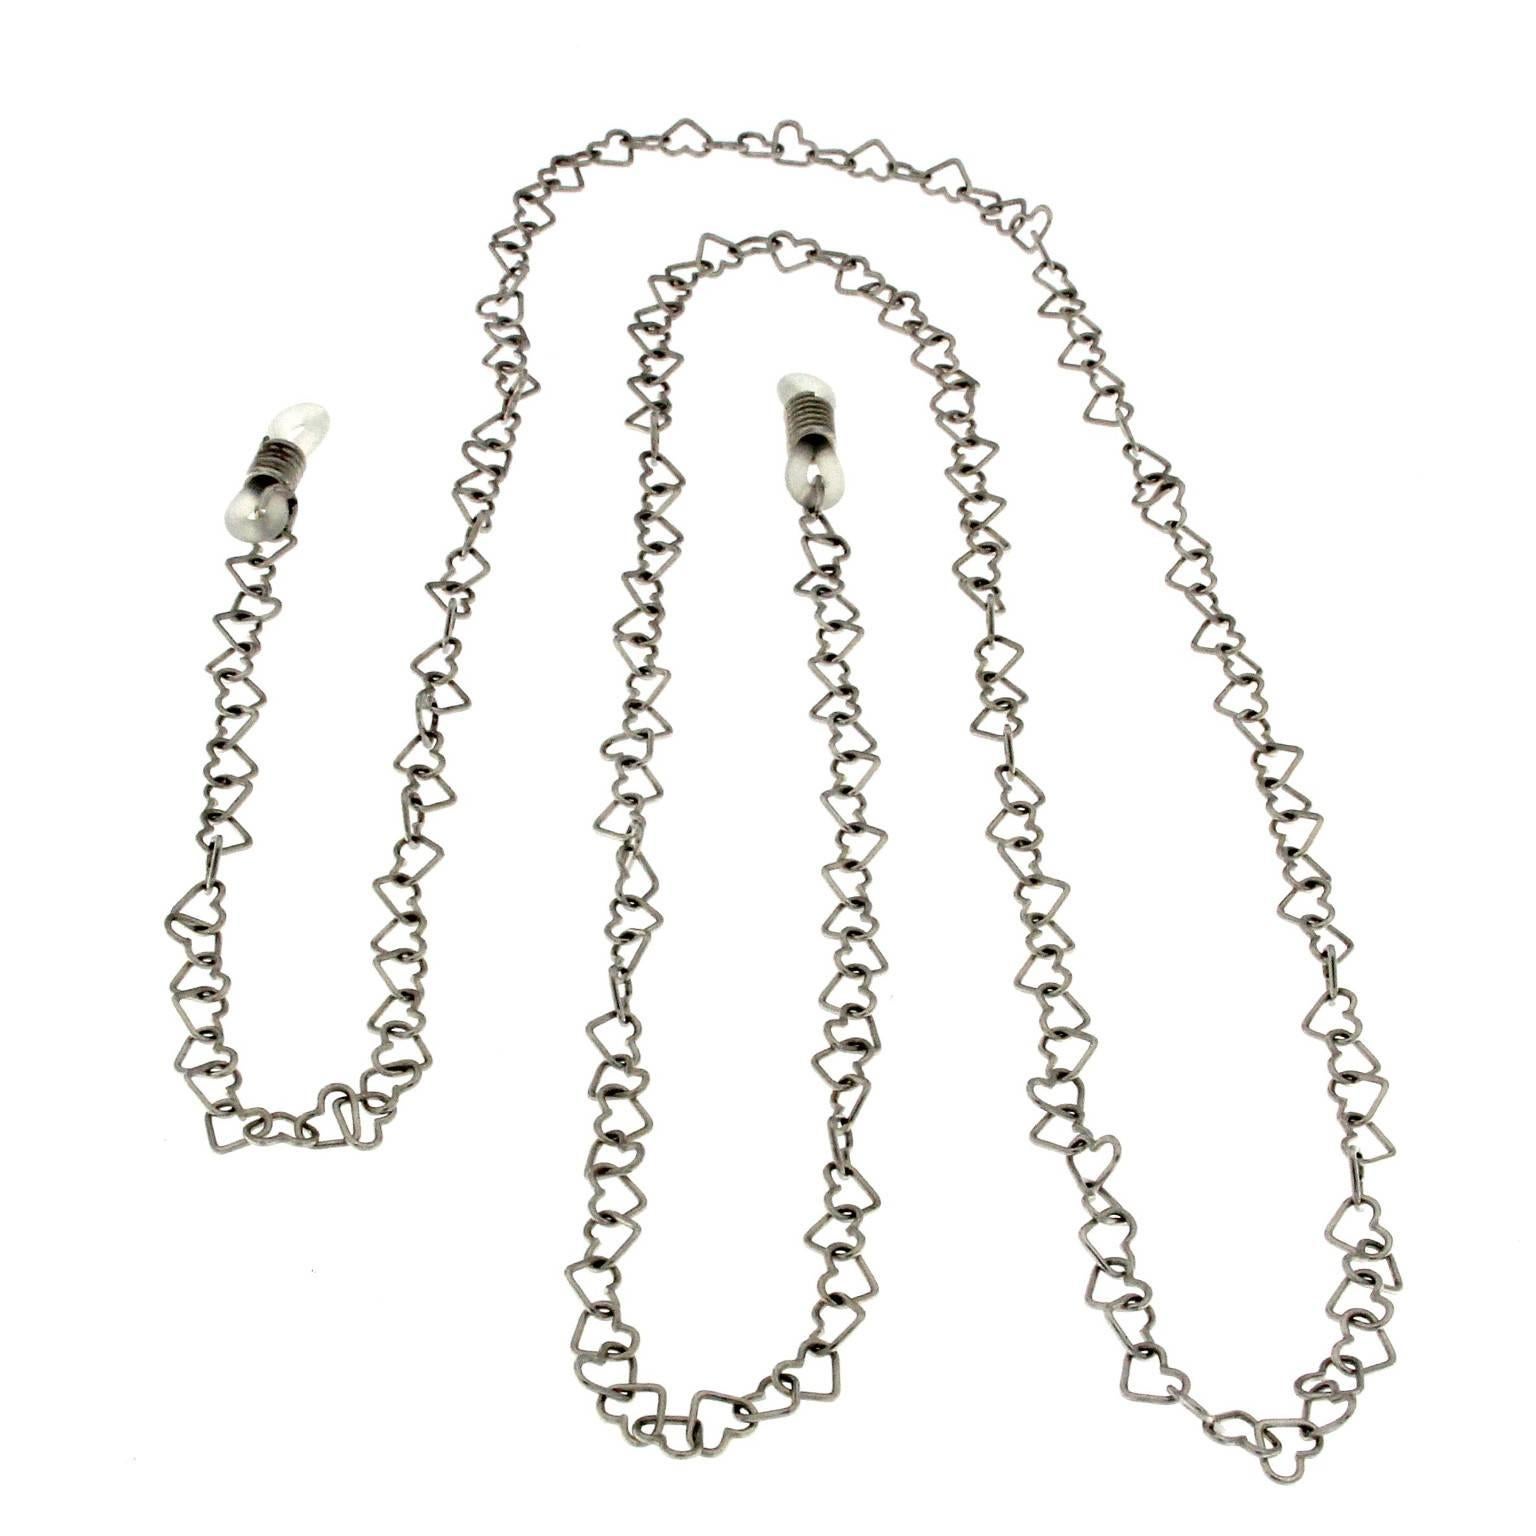 18 kt white gold chain with hearts for eyewear
The total weight of the gold is GR 14.40

Stamp 10 MI 750

